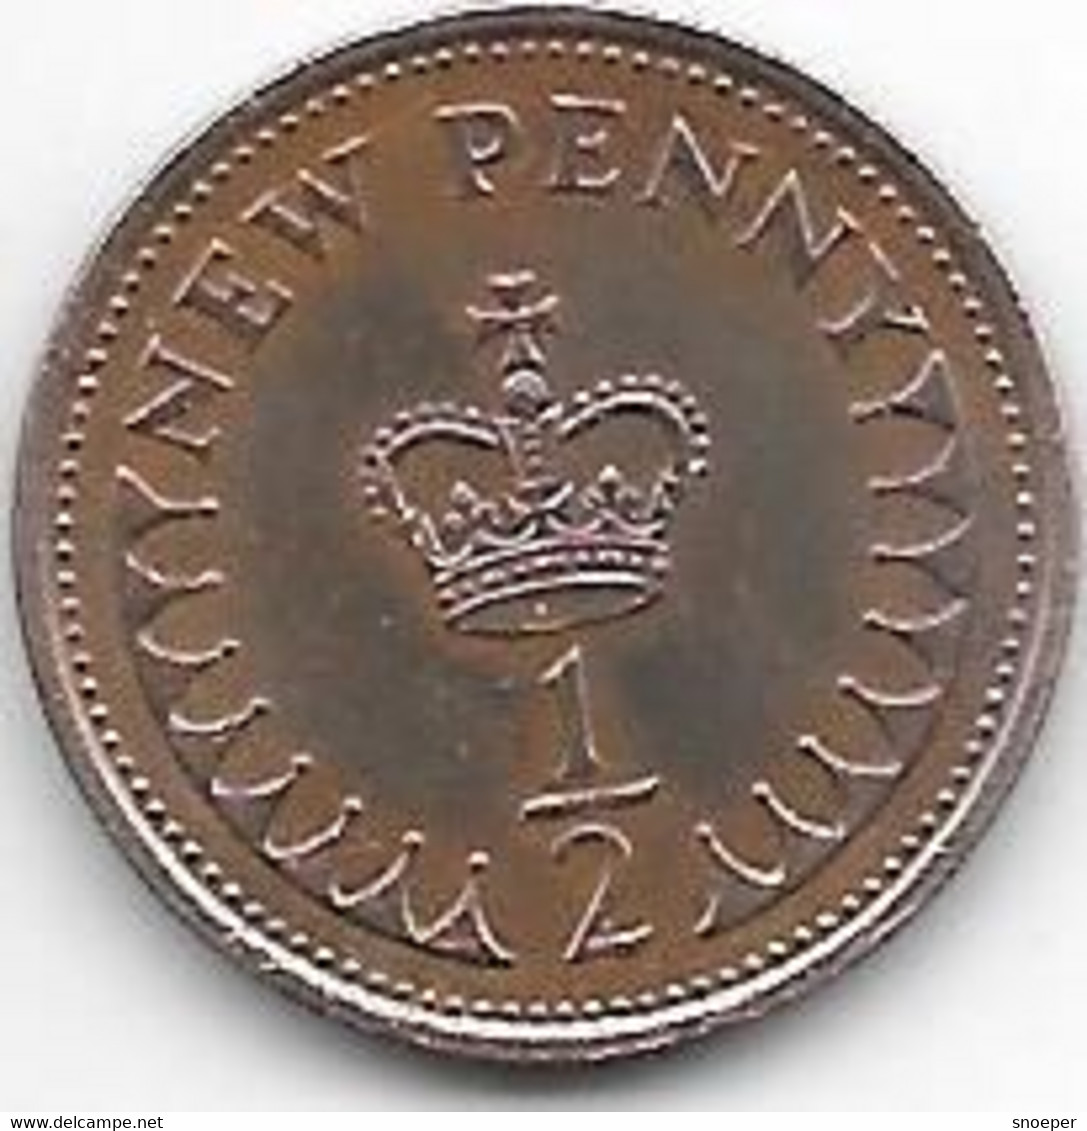 Great Britain 1/2 Penny 1980  Km 914  Unc/ms63 - 1/2 Penny & 1/2 New Penny